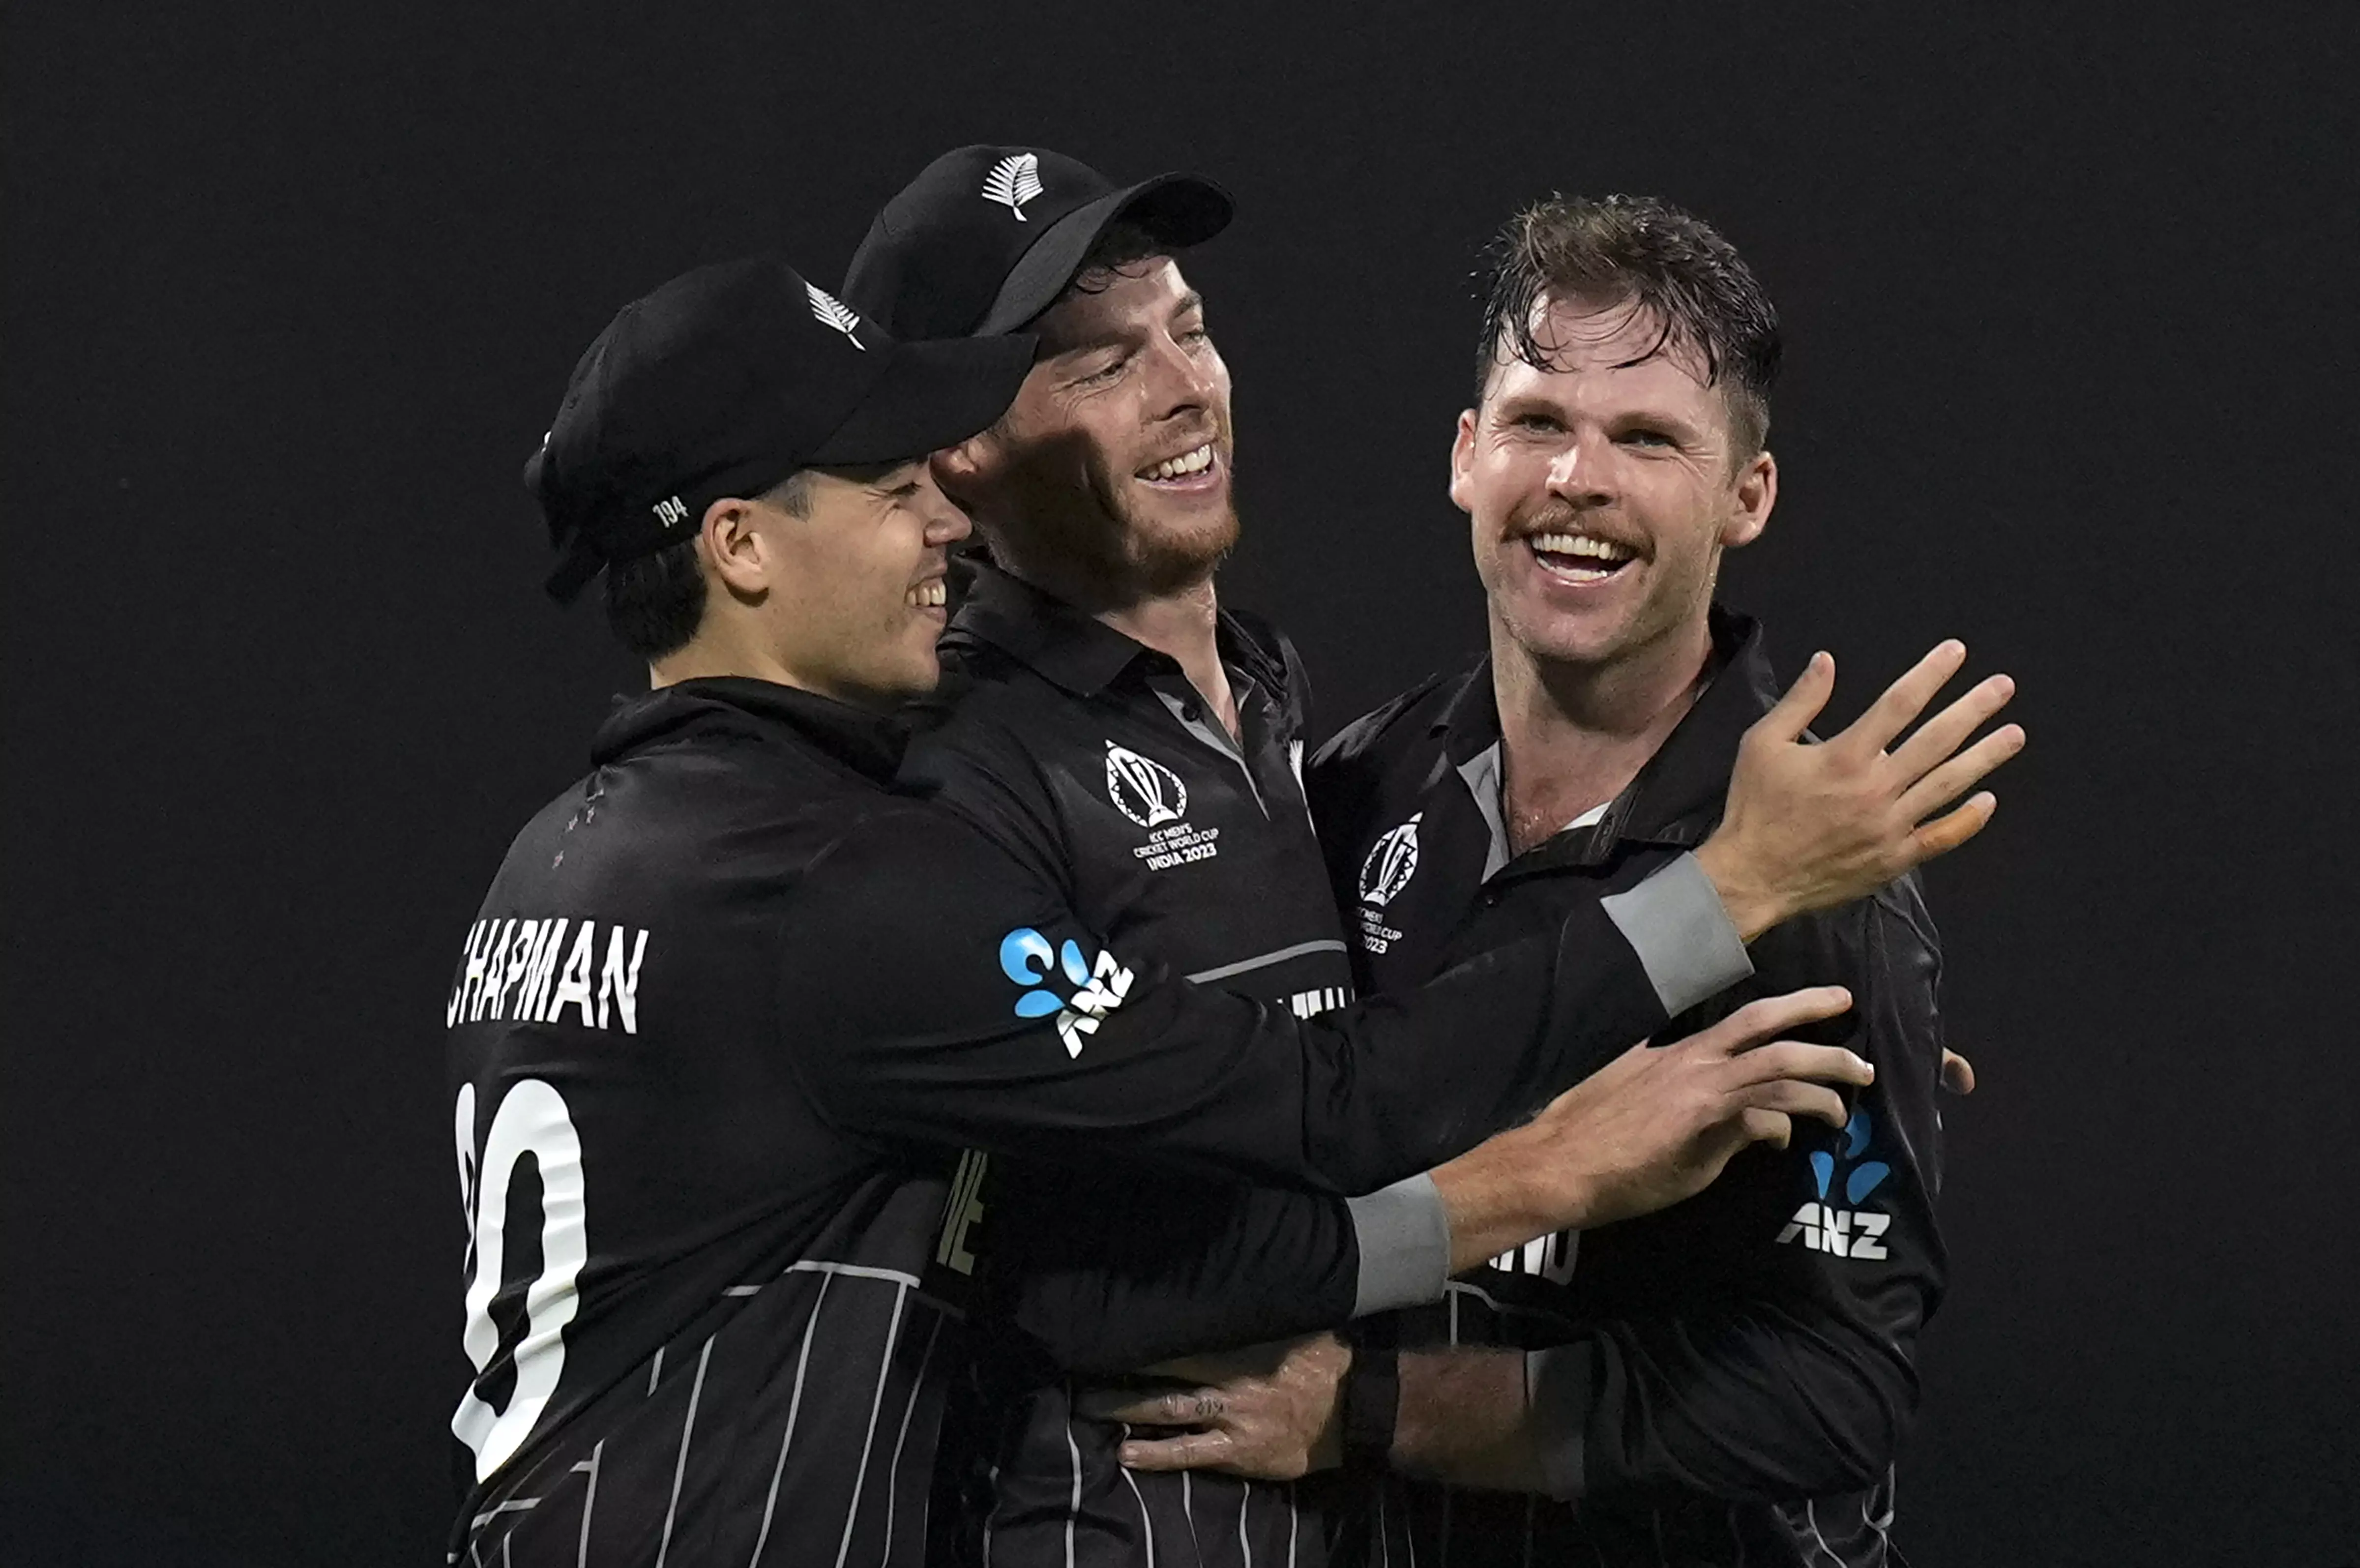 New Zealand make it 4 wins in a row, top WC table